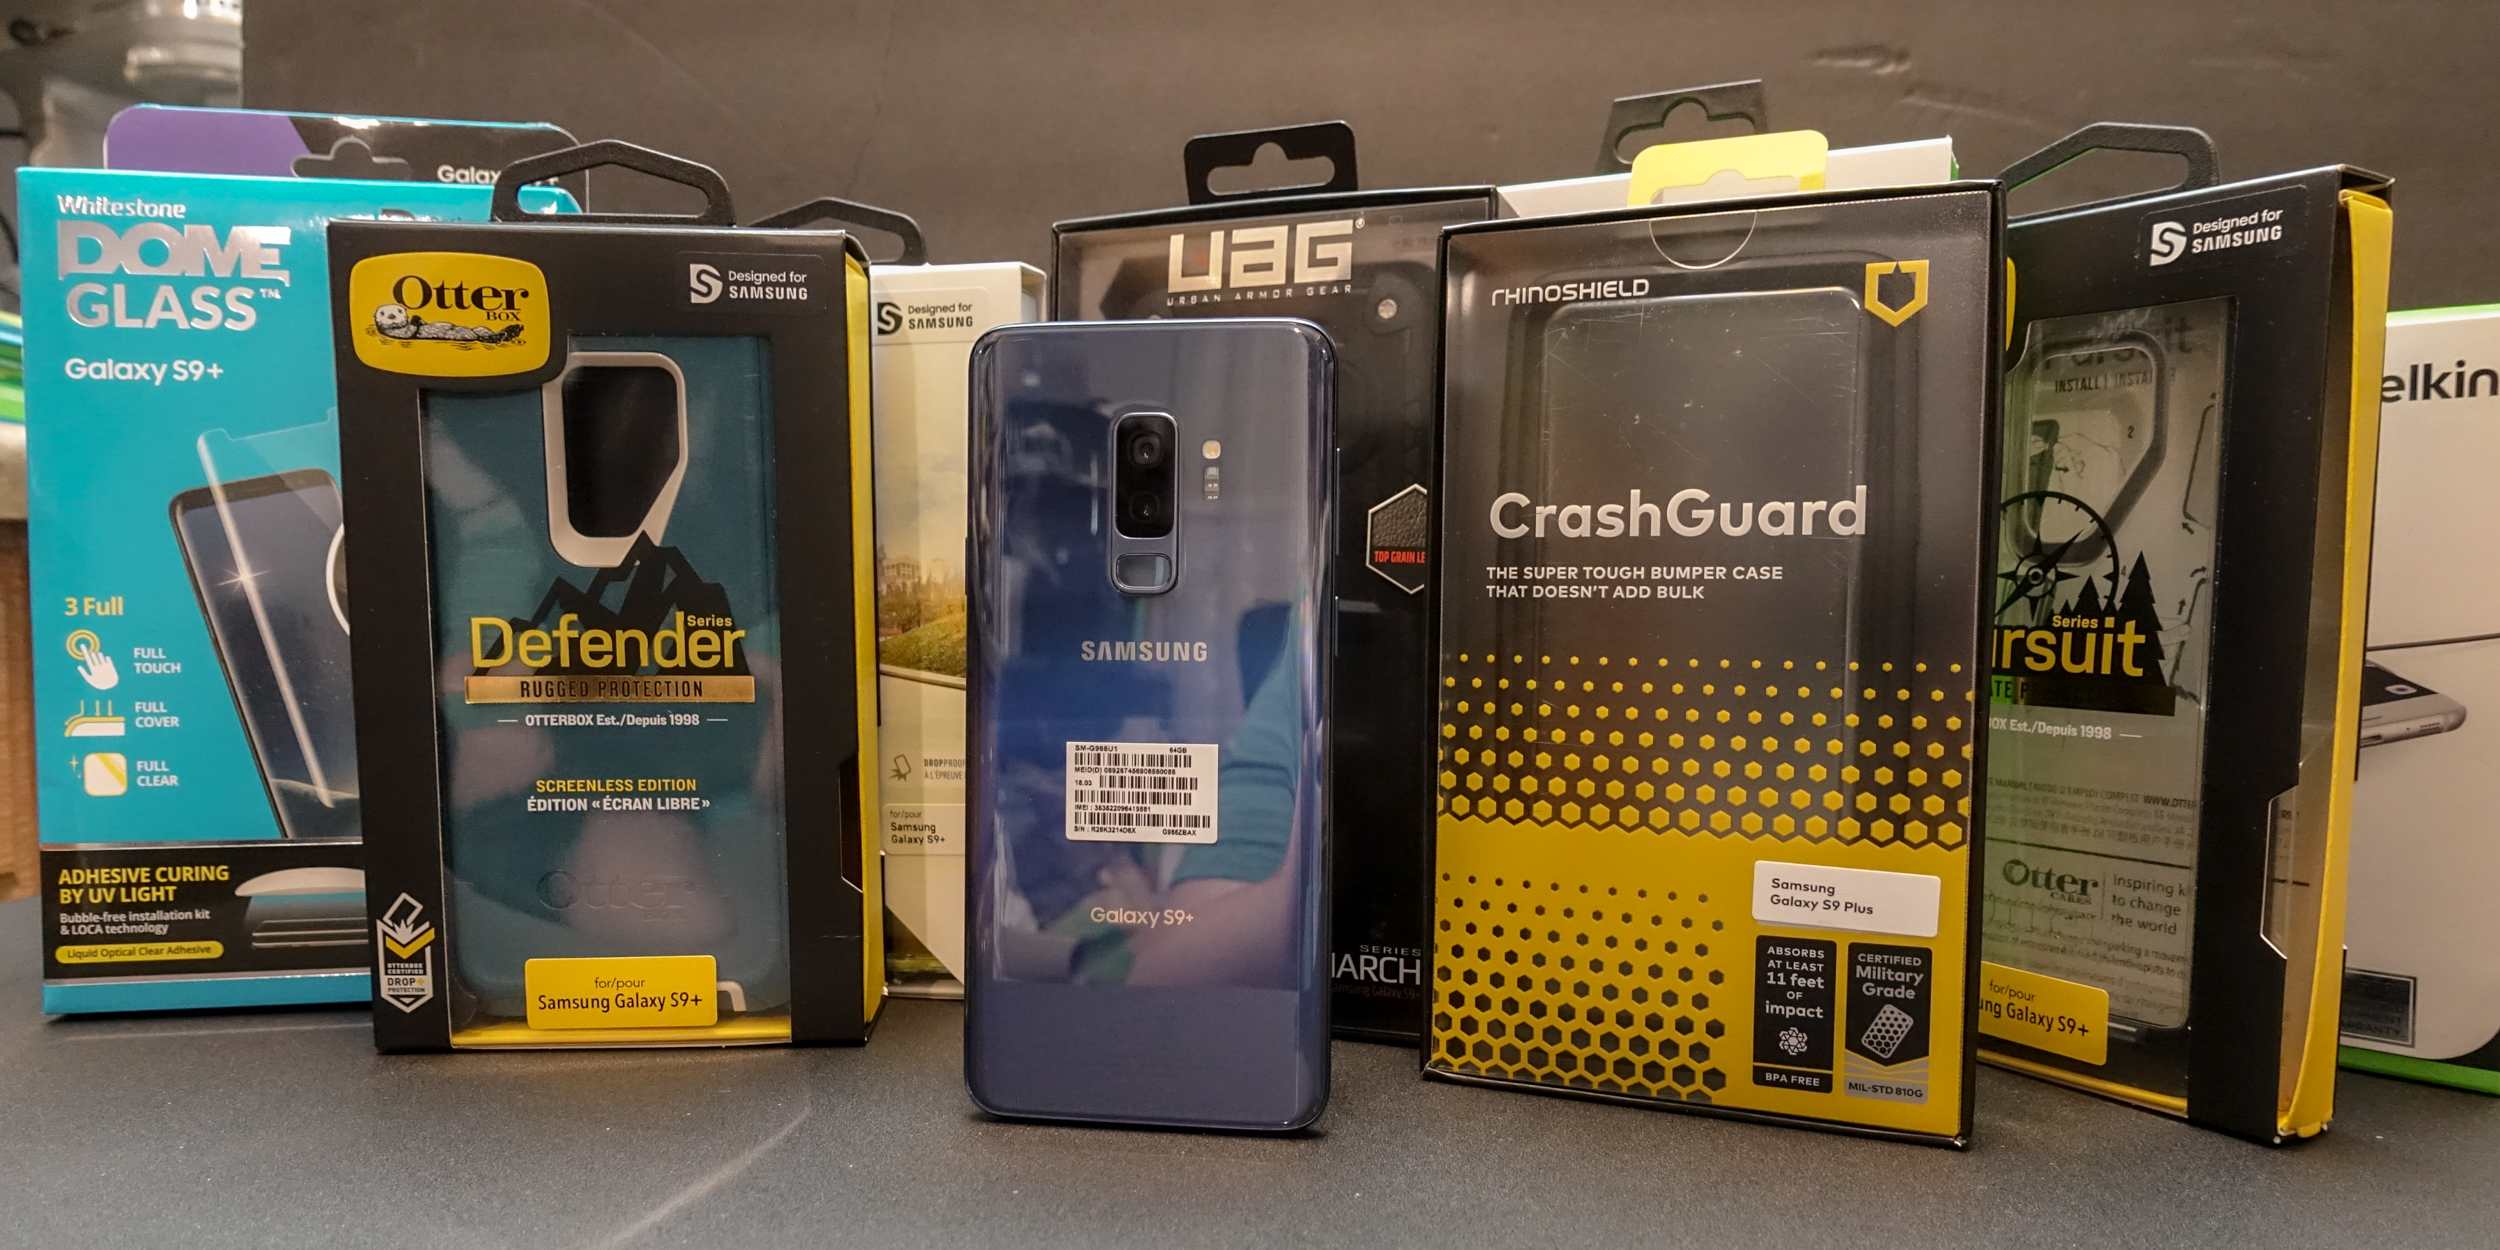 Best cases & protectors the Galaxy